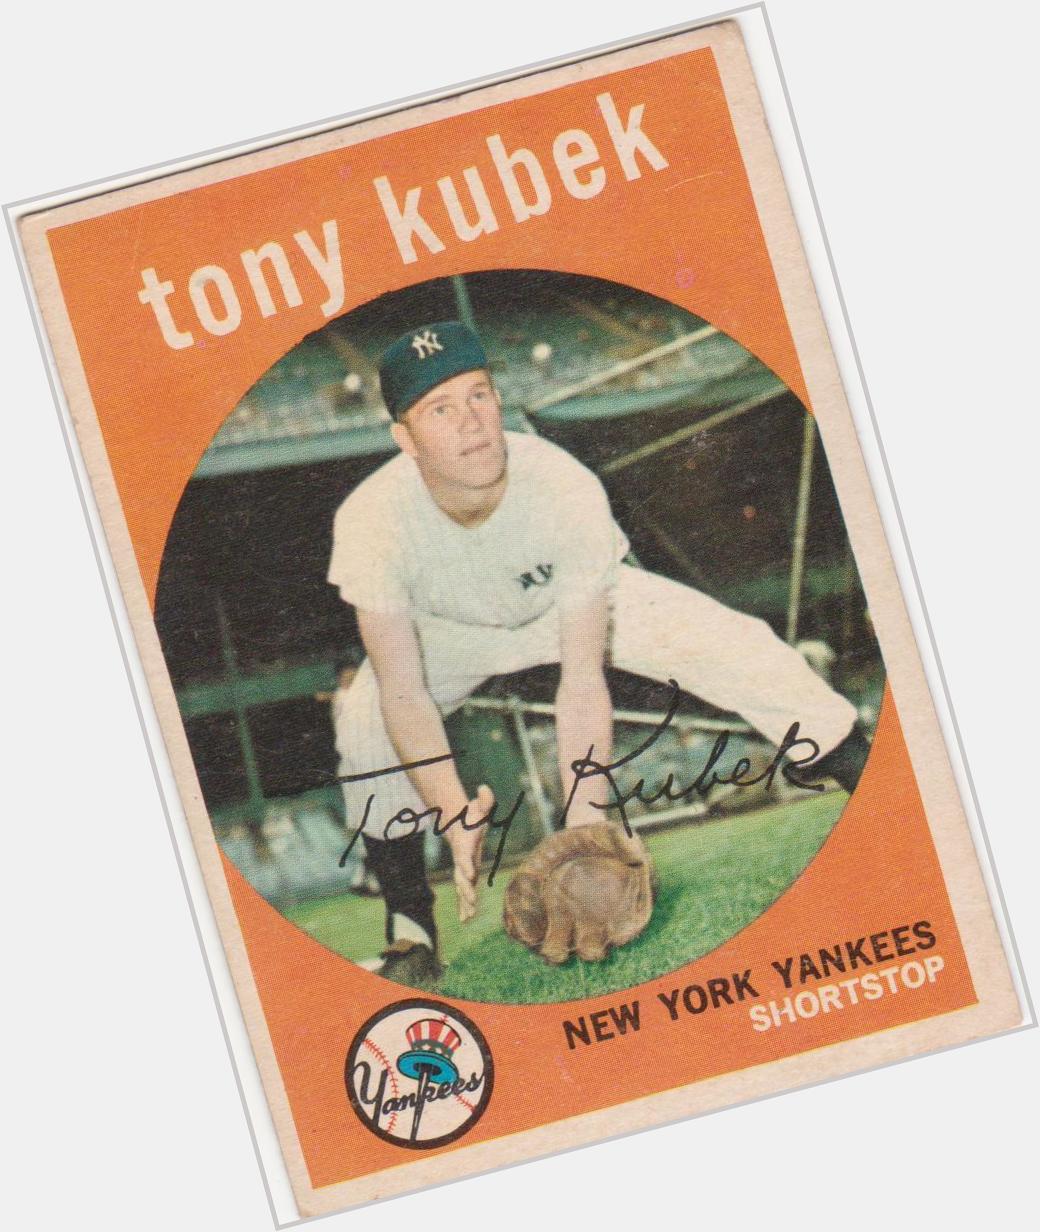 Happy 80th birthday to Tony Kubek, played in 6 World Series and broadcasted 12. 